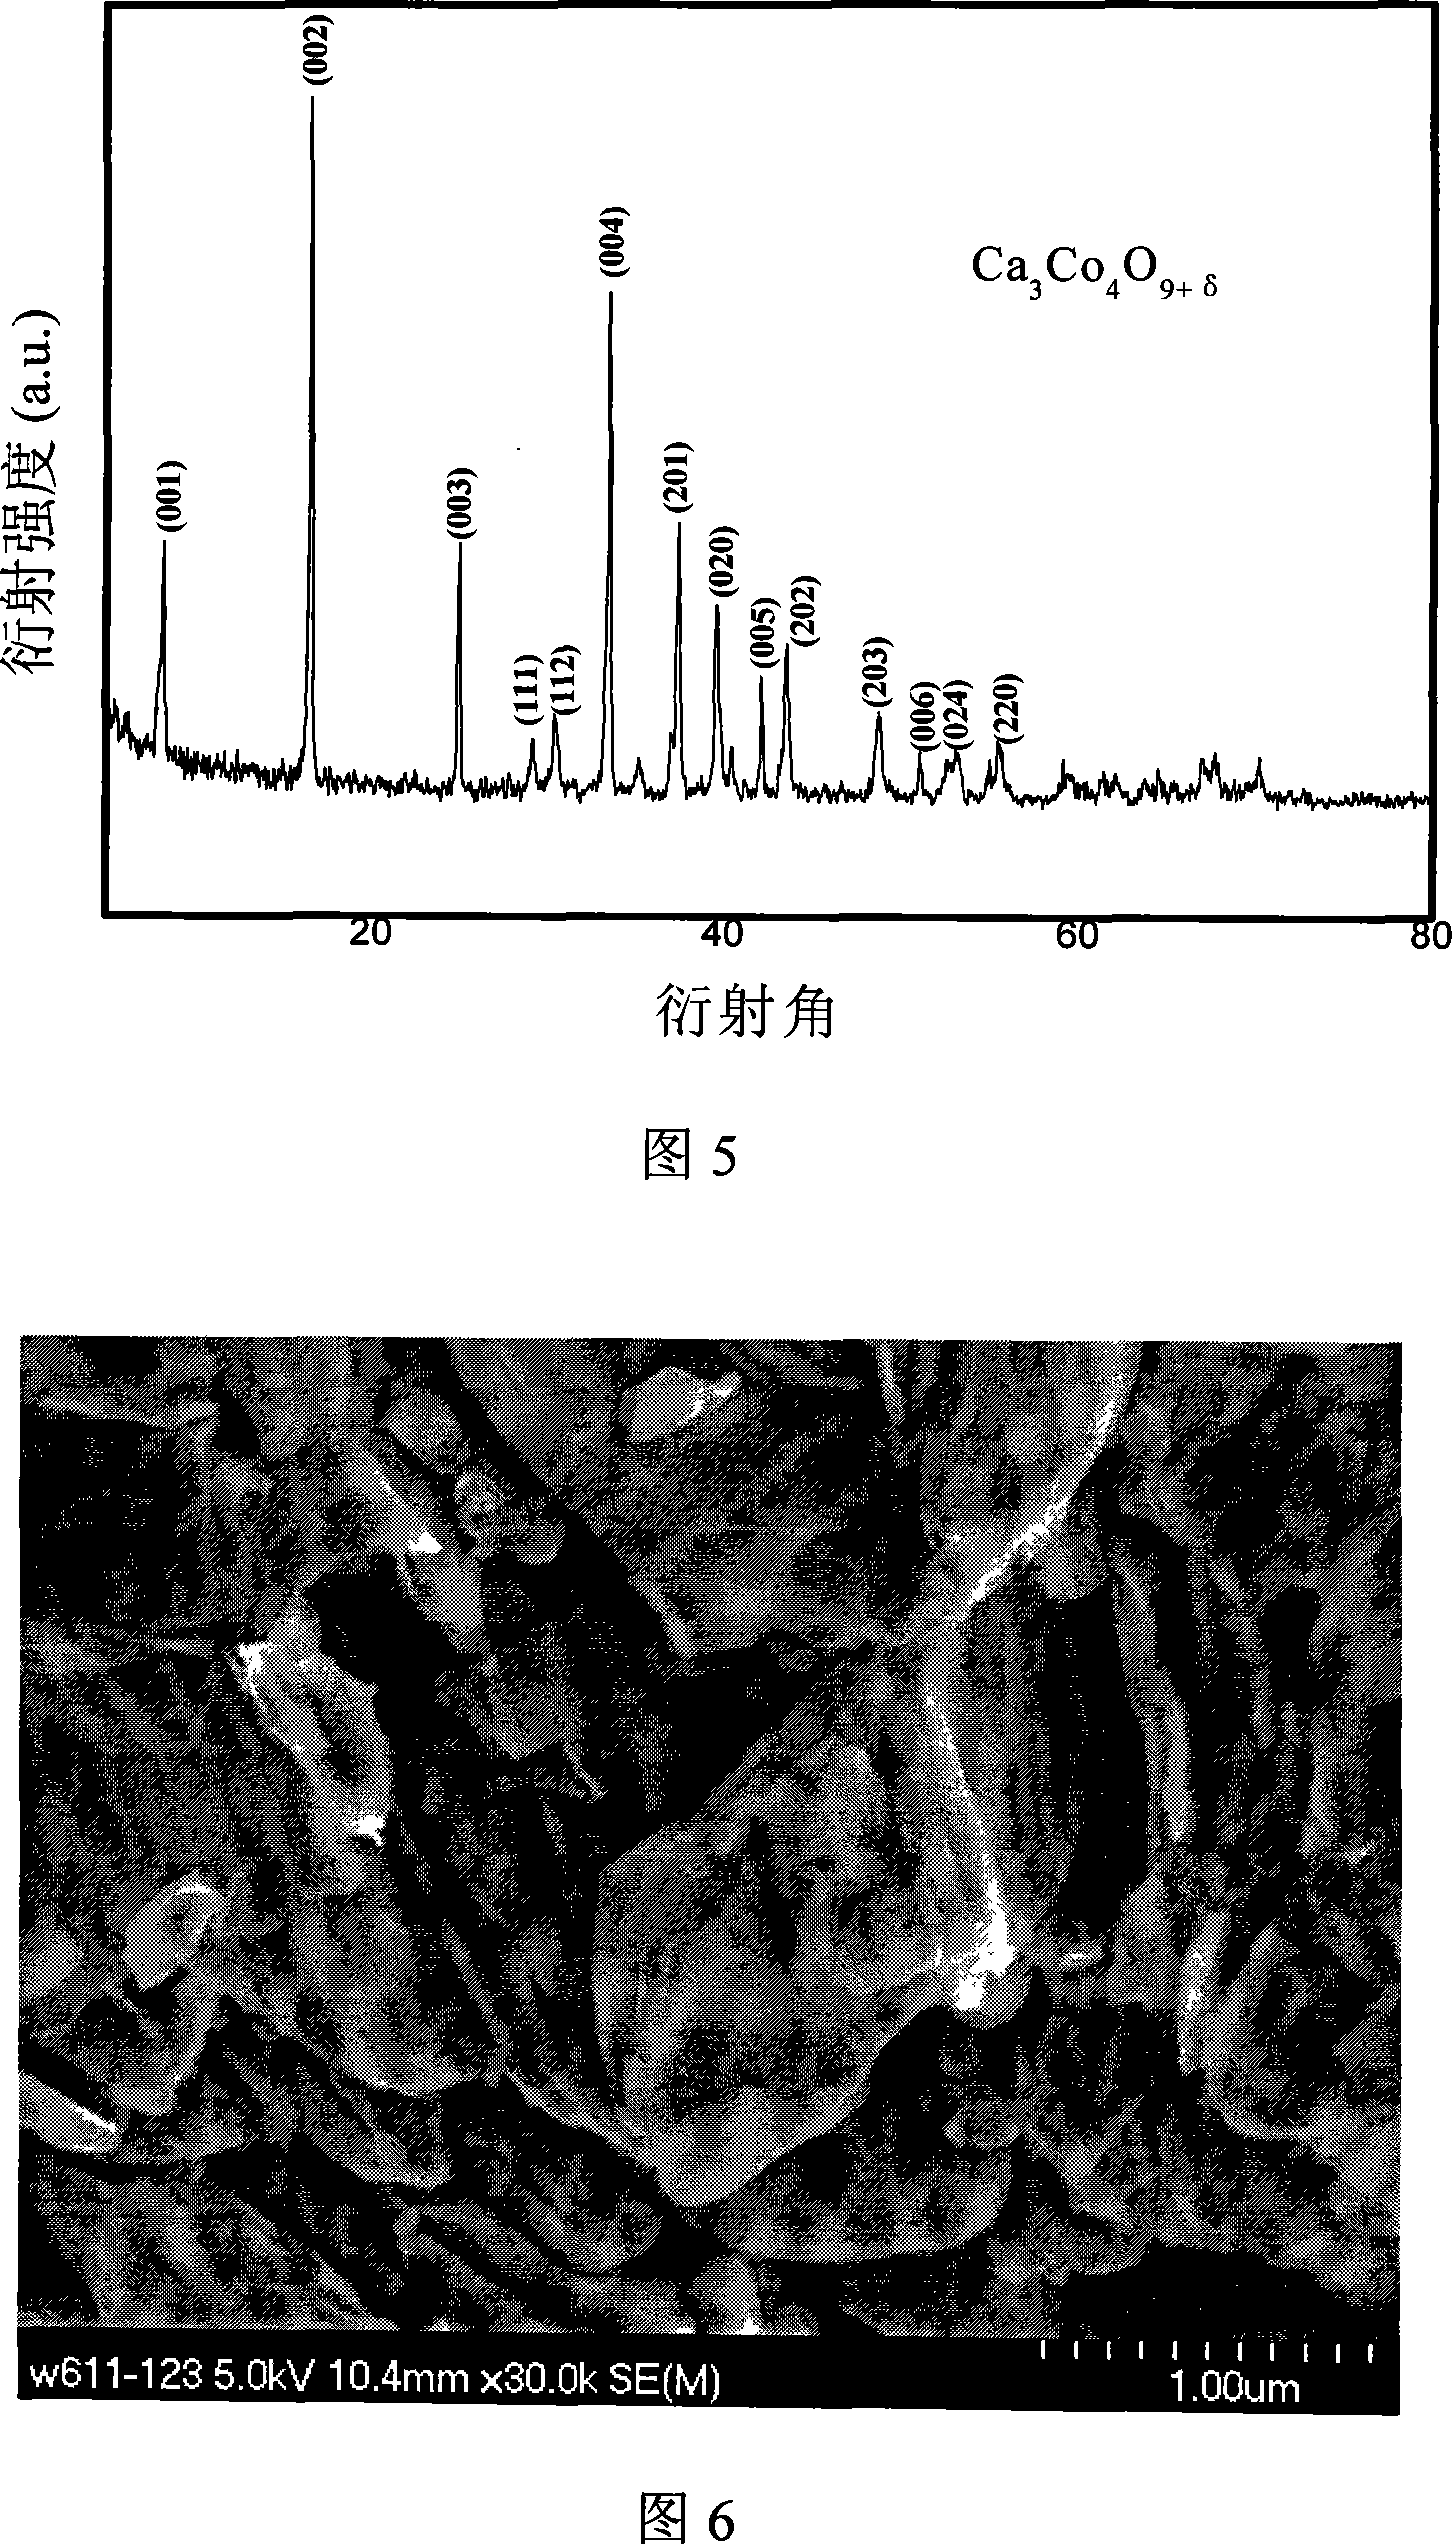 Modified Ca-Co-O system doped transition metal composite oxides and preparation method thereof